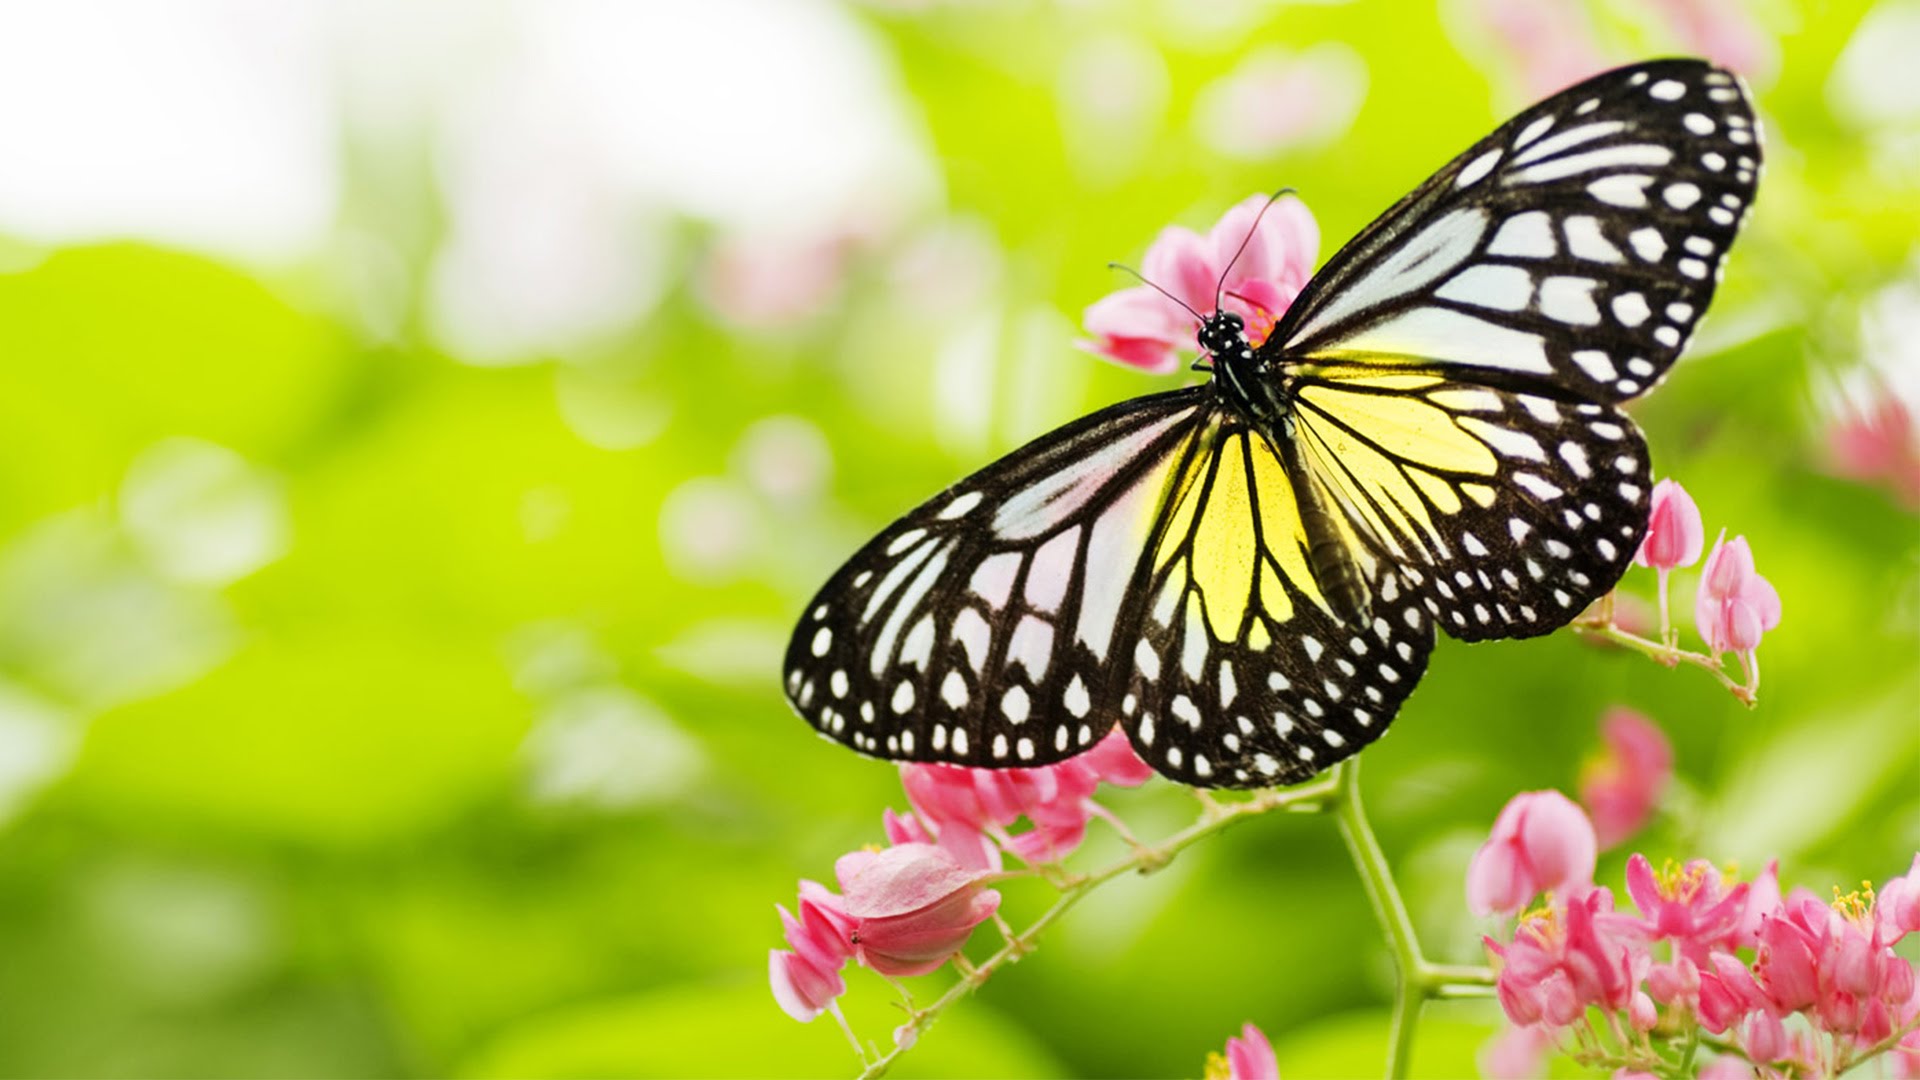 The Butterfly And Flower - Relaxing Piano Music HD 1080p - YouTube